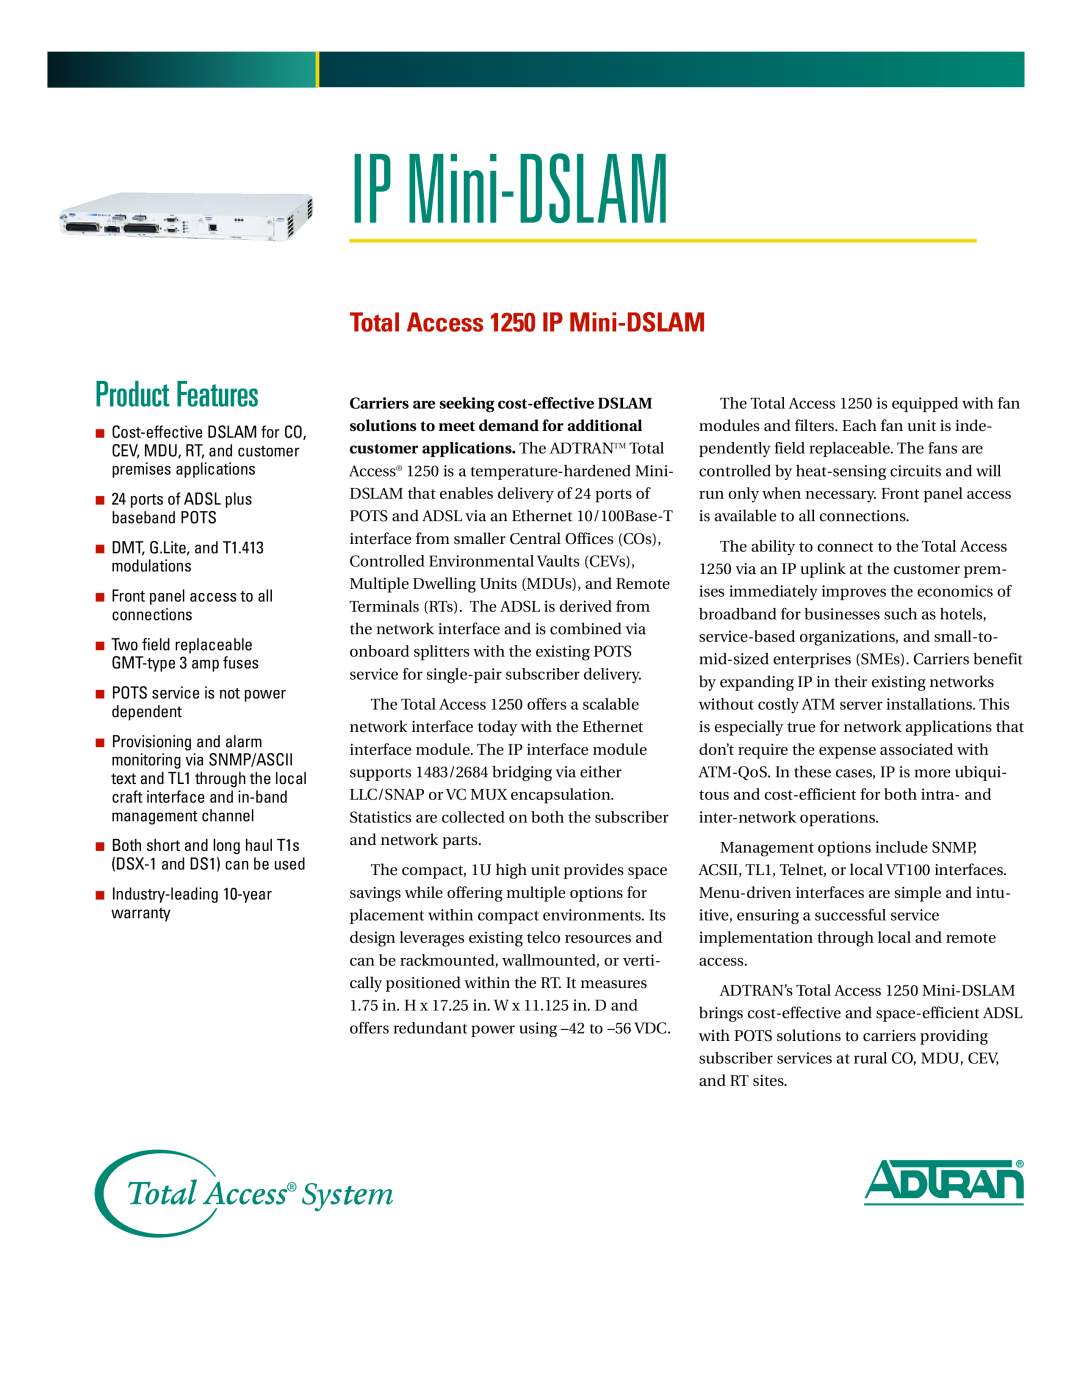 ADTRAN warranty Product Features, Total Access 1250 IP Mini-DSLAM, DMT, G.Lite, and T1.413 modulations 